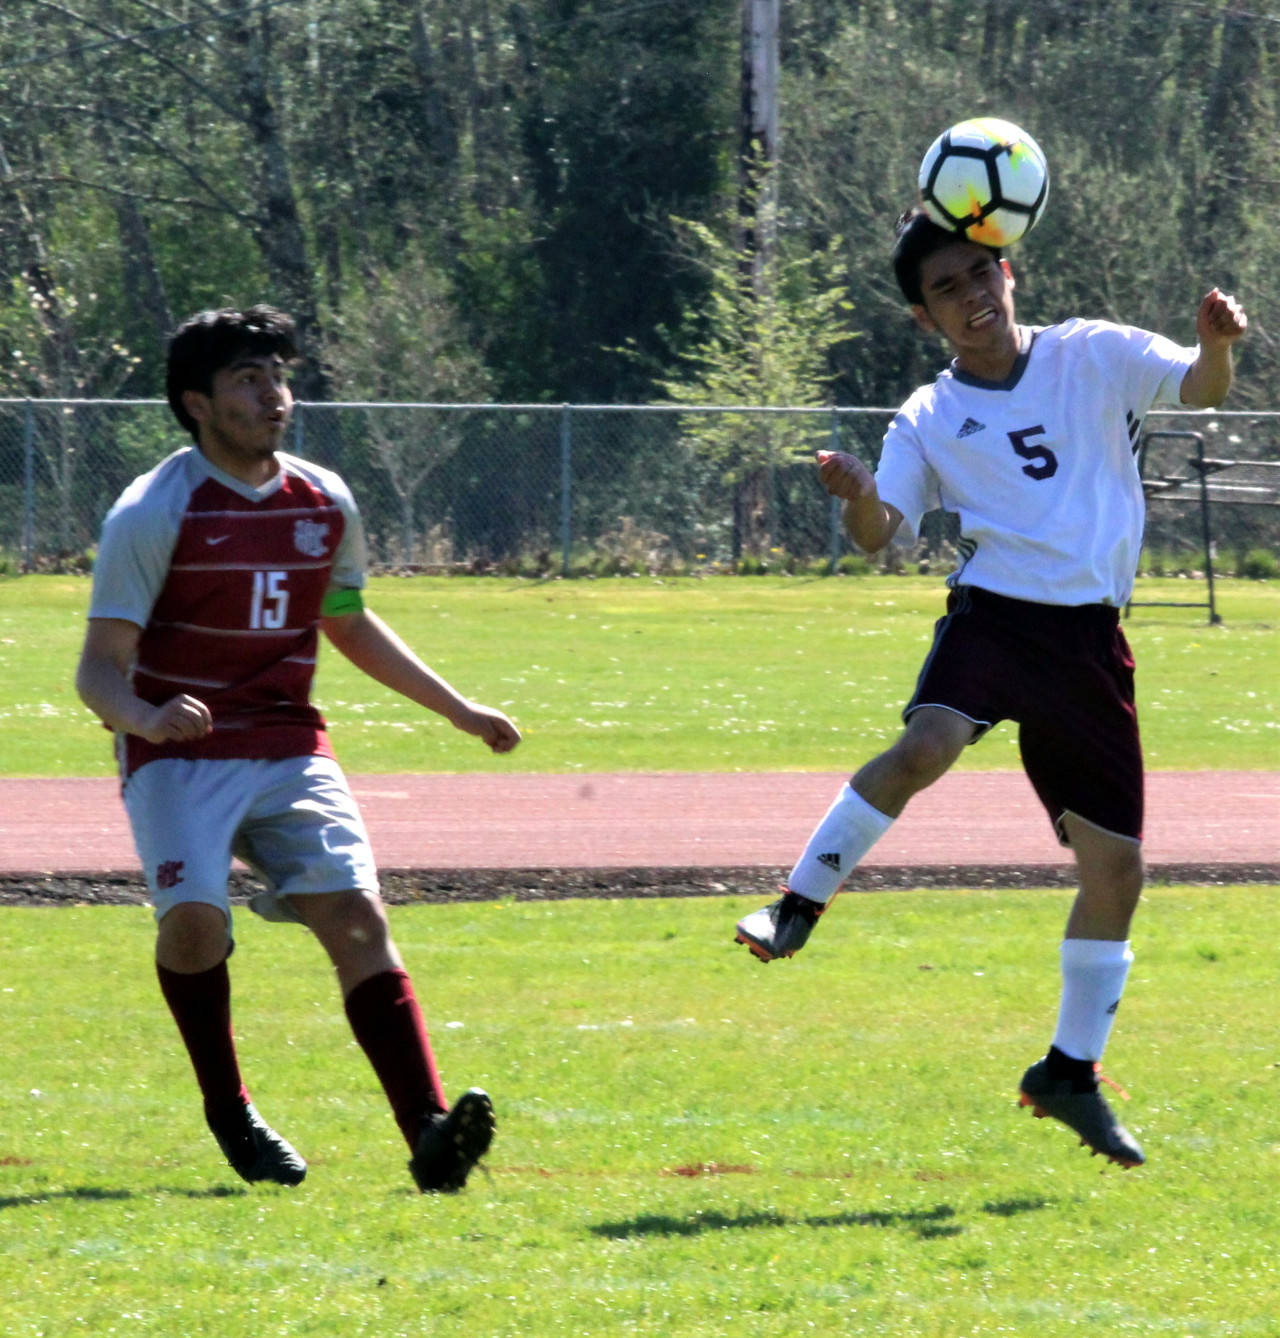 PHOTO BY BEN WINKELMAN Montesano’s Yased Ramirez (5) gets a head on the ball in front of Hoquiam’s Daniel Cortes during a game on Saturday in Hoquiam.